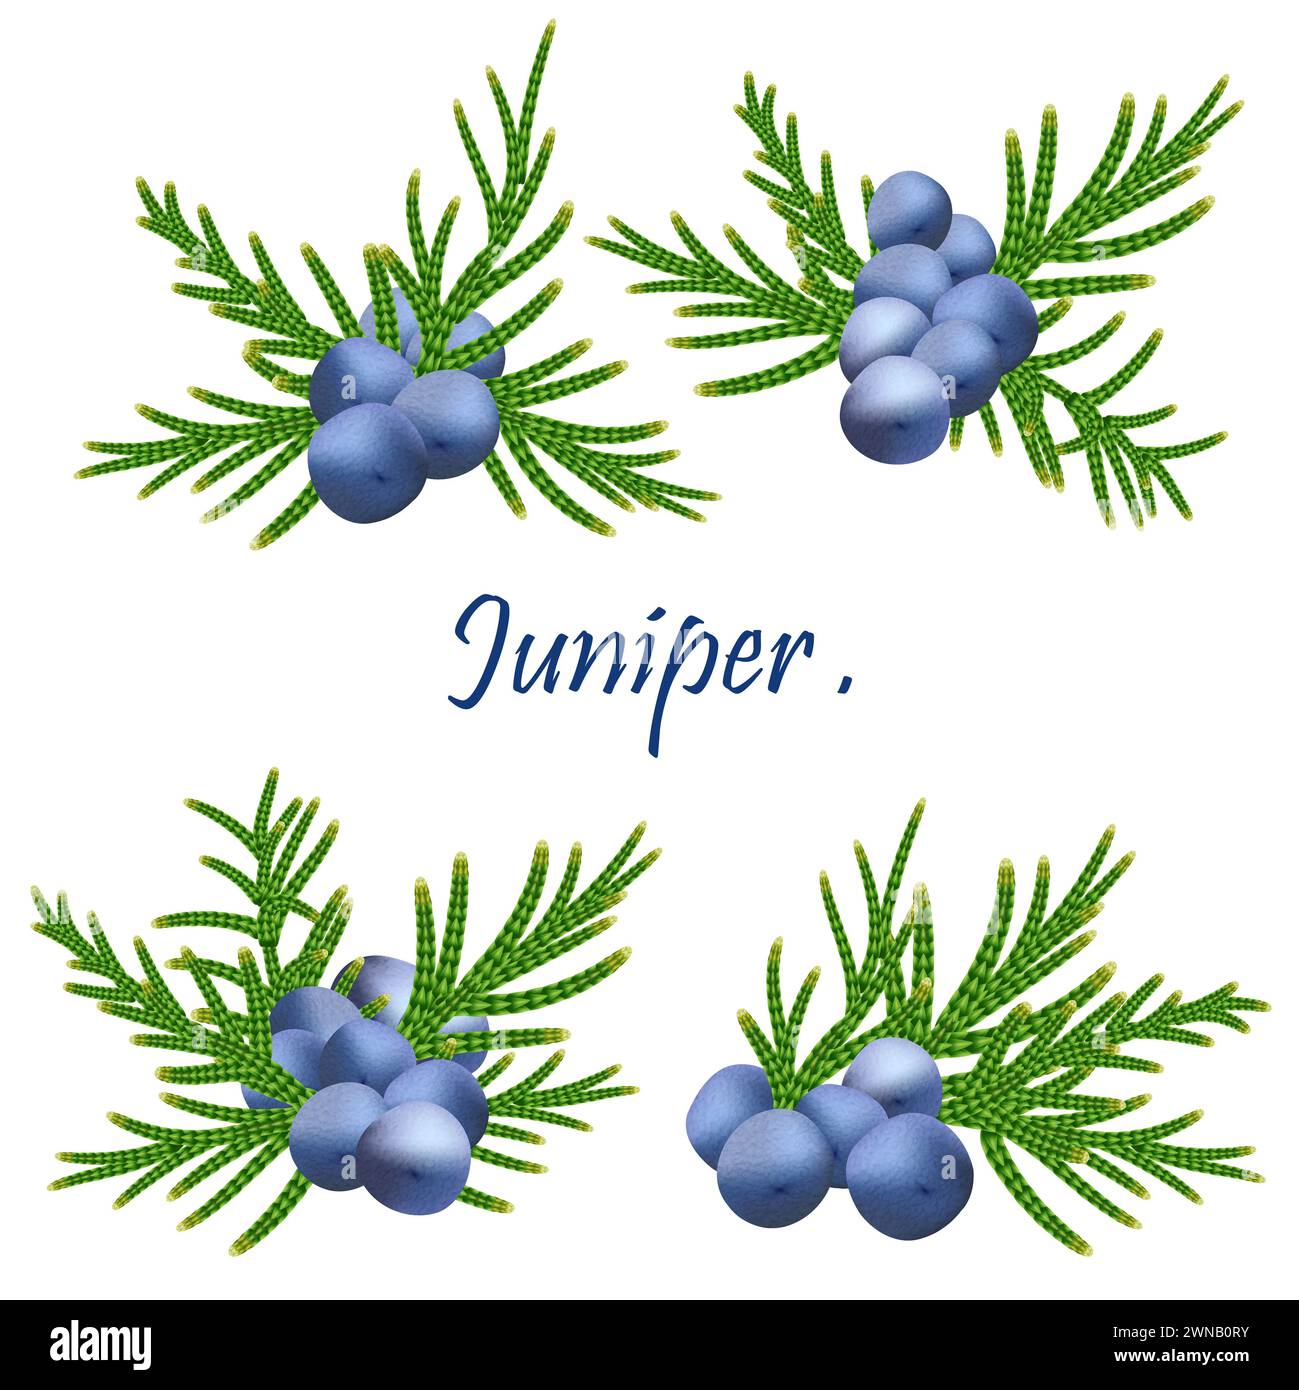 blue berries and juniper branch. Cones and leaves of Juniper isolated on white background. Winter holiday Christmas decorative art objects. Isolated w Stock Photo